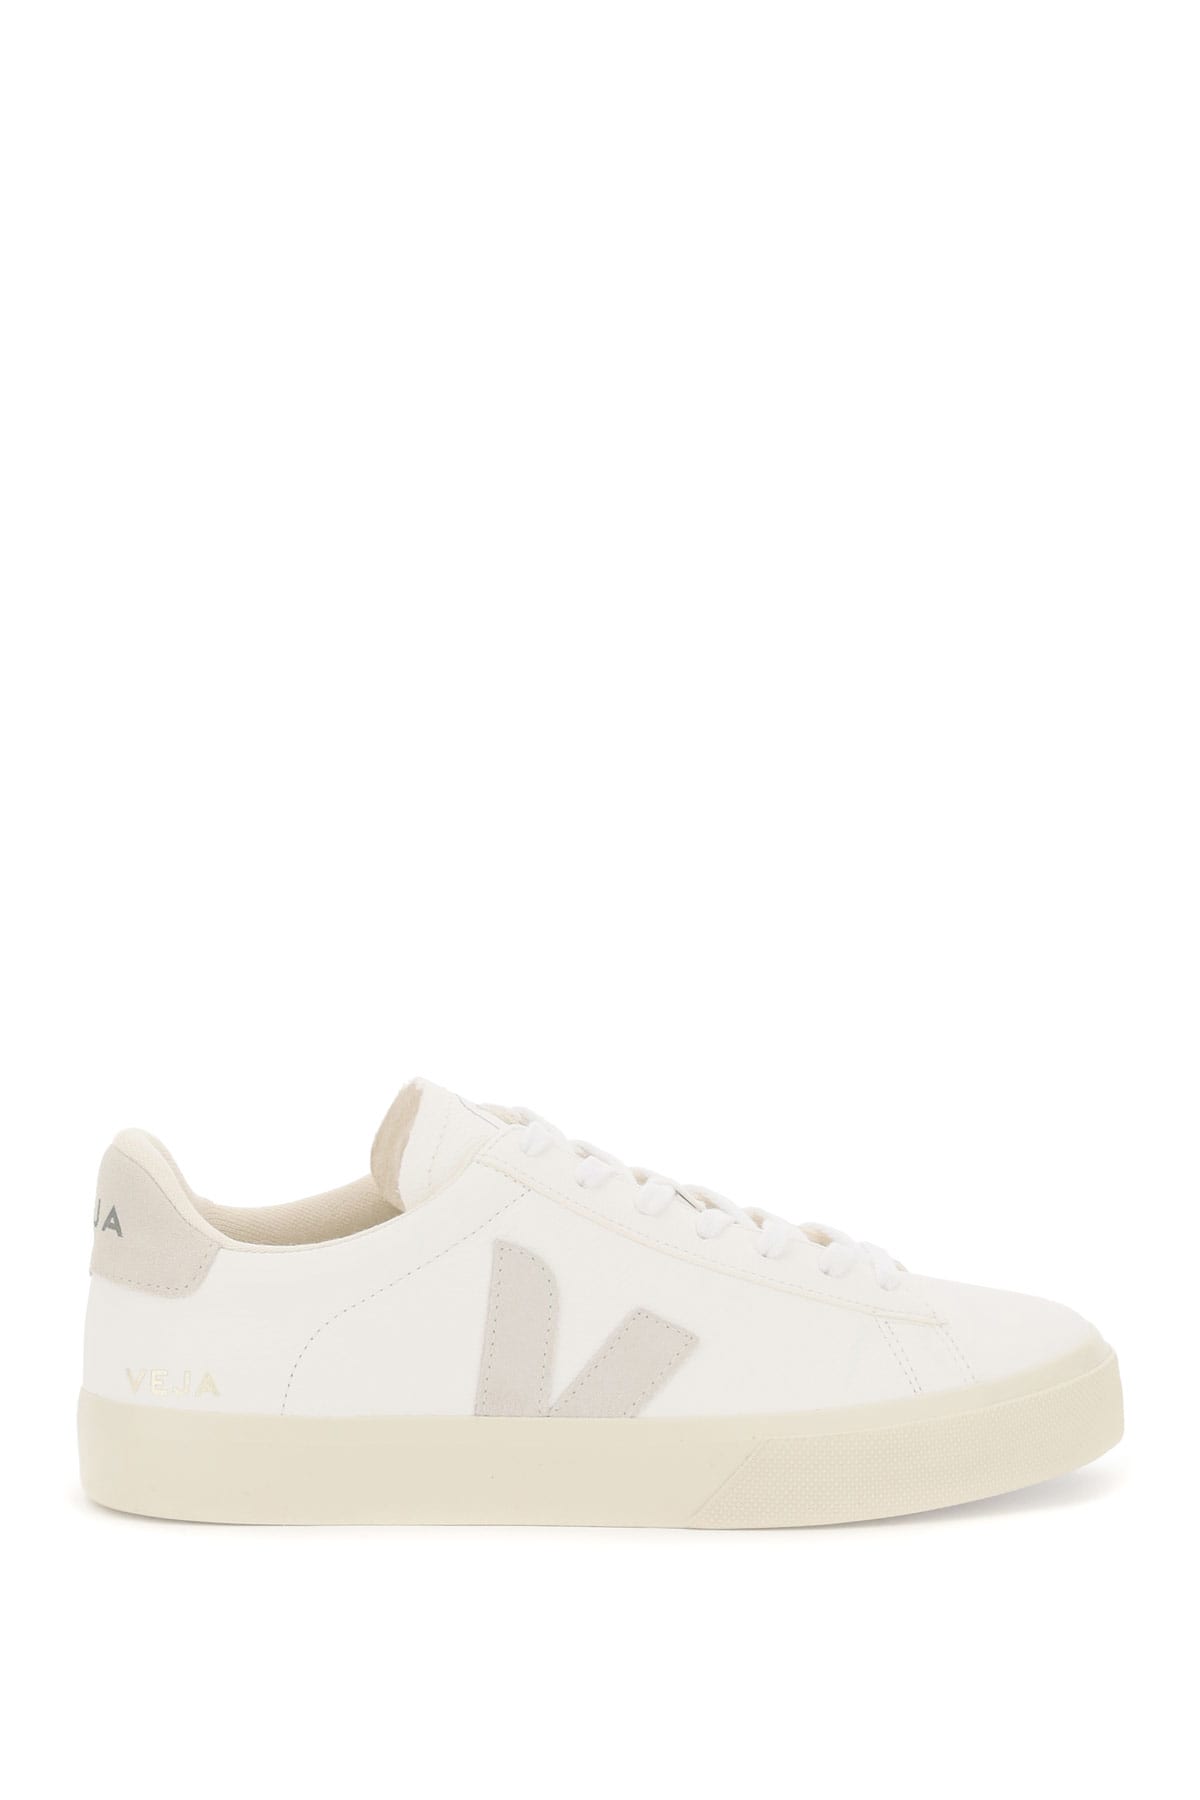 Shop Veja Campo Chromefree Leather Sneakers In Extra White Natural Suede (white)